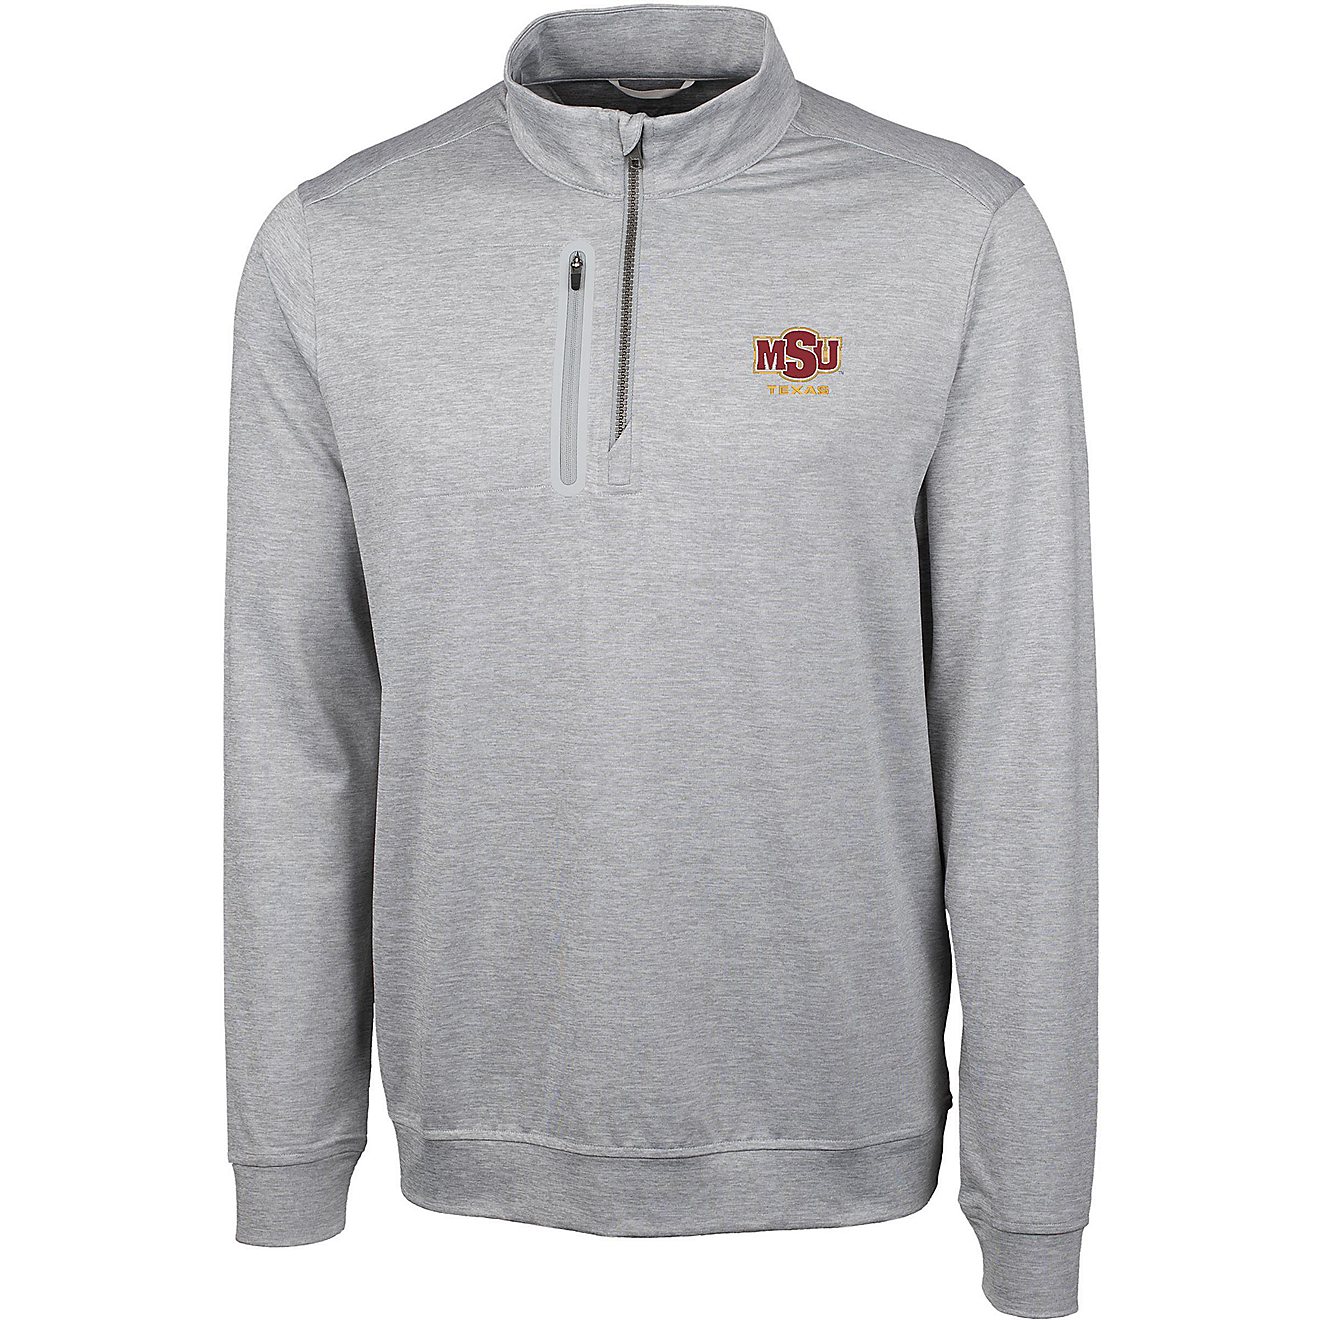 Cutter & Buck Men's Midwestern State University Stealth Half Zip  -TALL-                                                         - view number 1